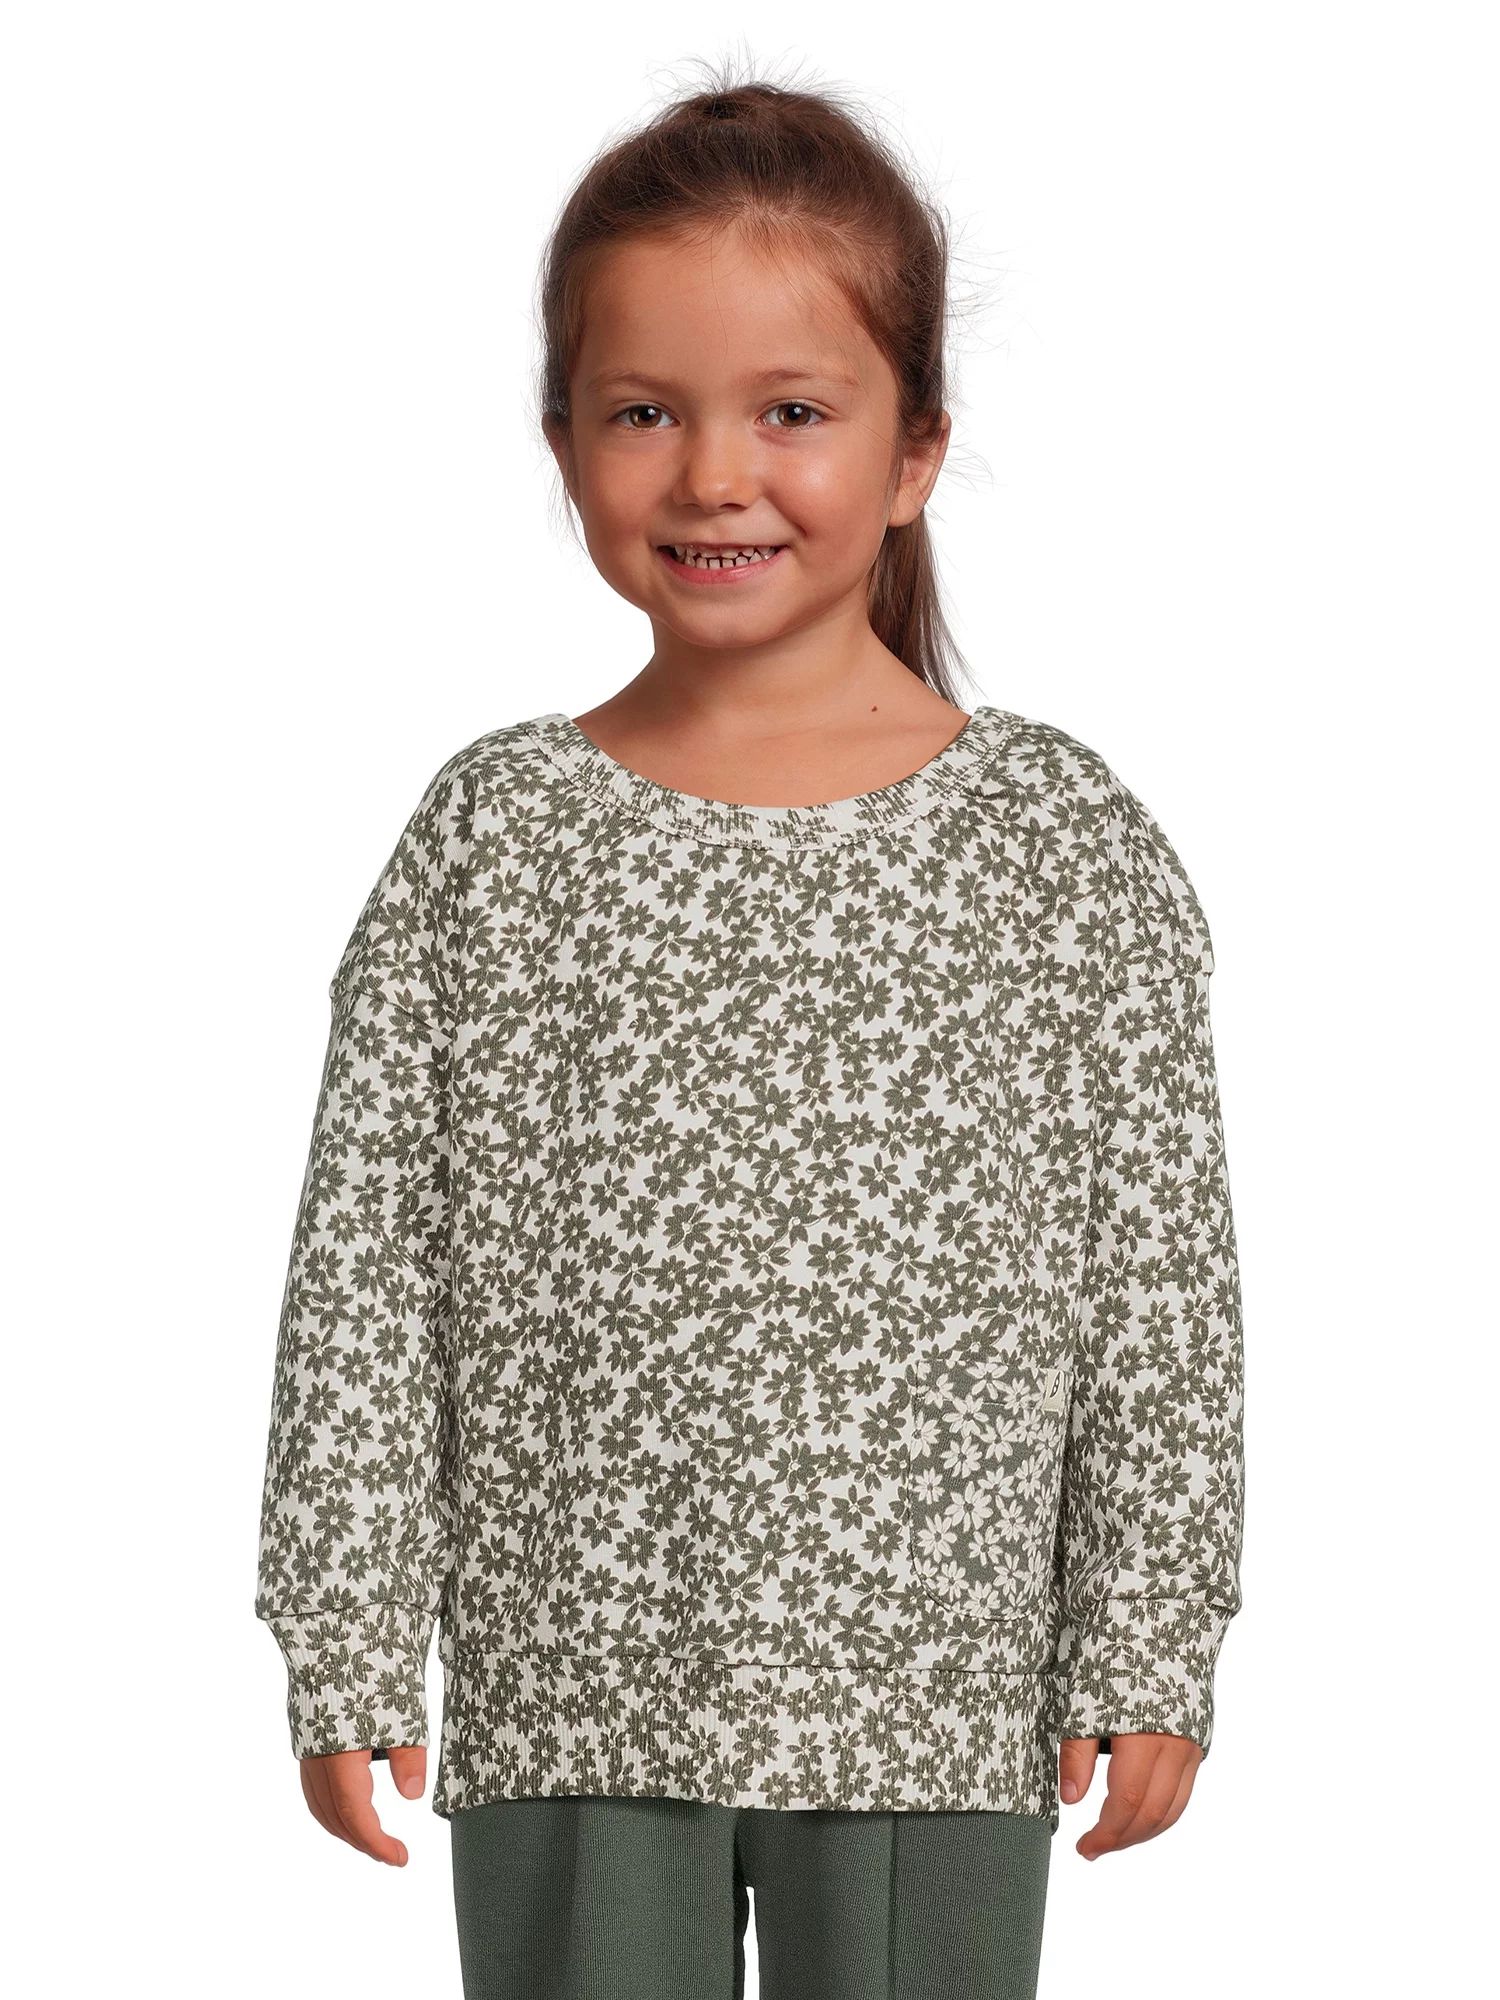 easy-peasy Baby and Toddler Girl Fashion Top, 12M-4T | Walmart (US)